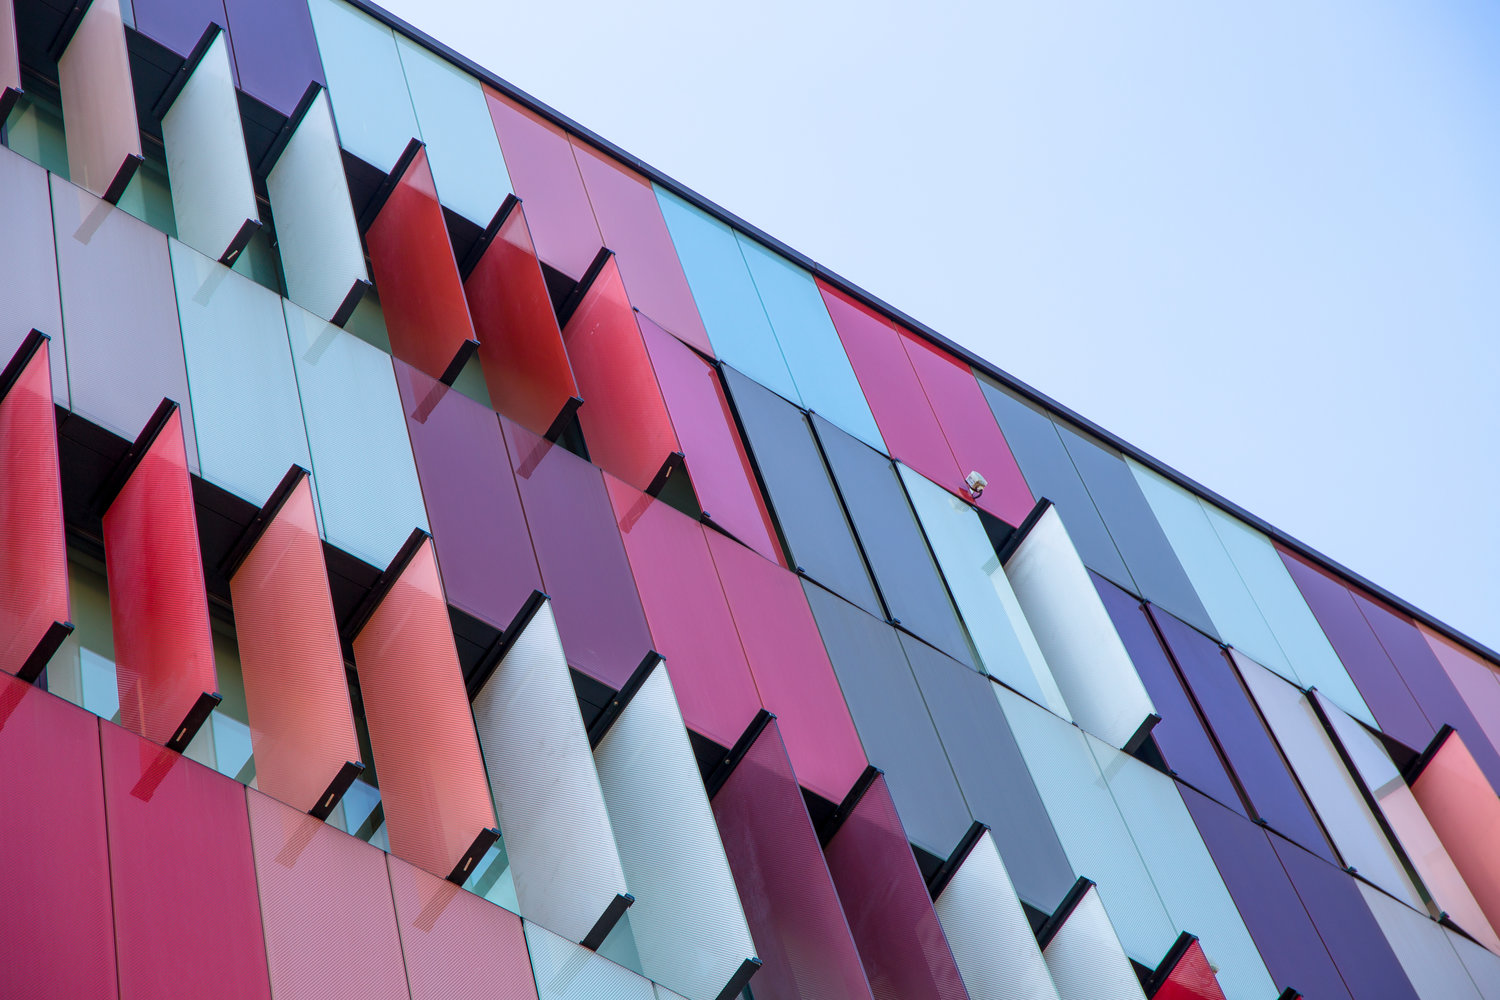 Textured Powder Coatings in Architectural Applications - TIGER